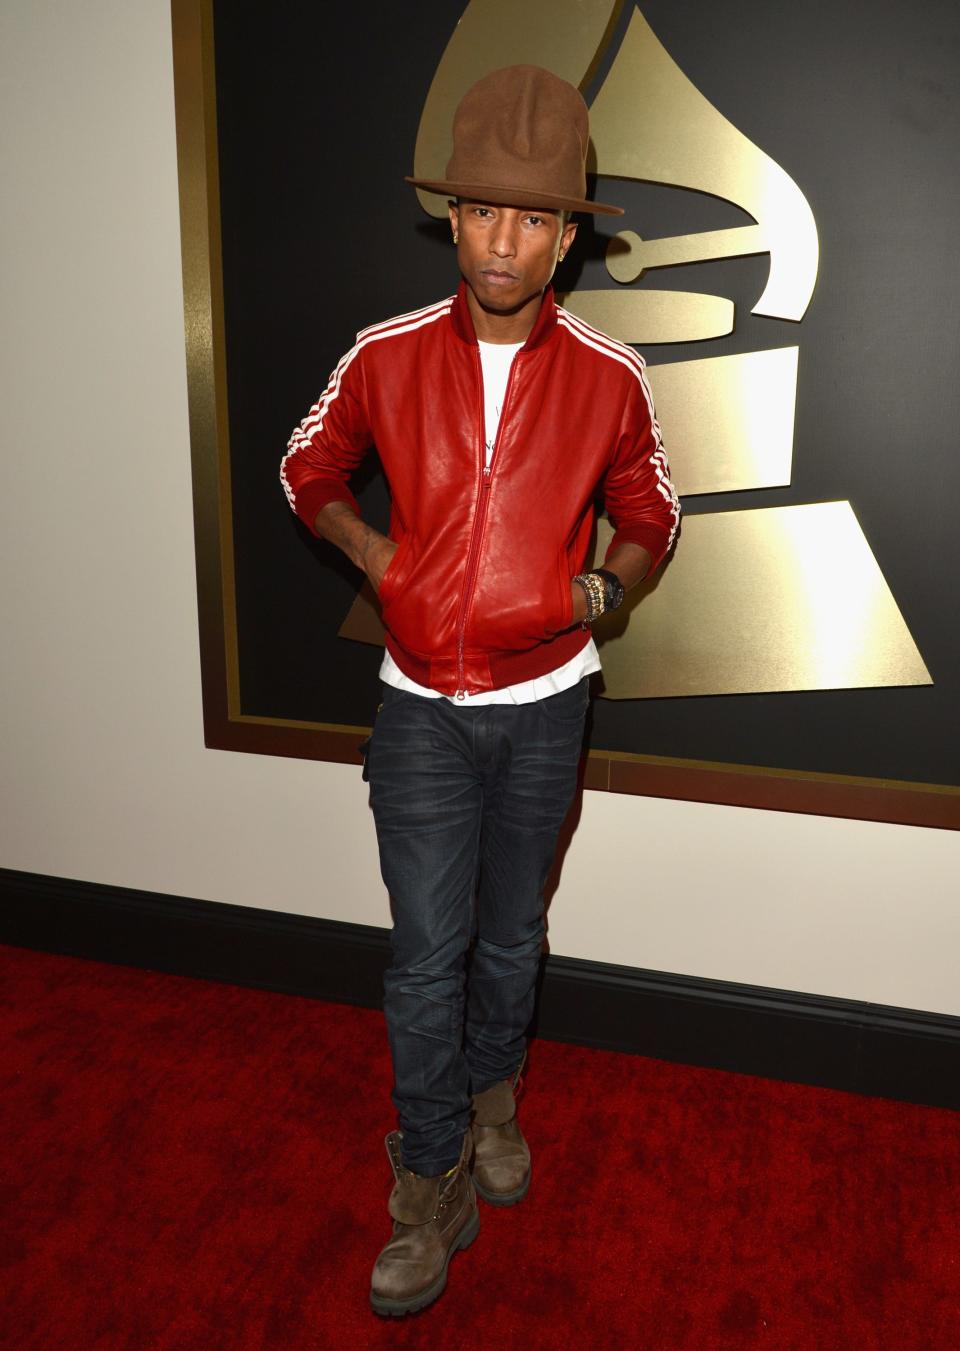 Pharrell Williams at the 56th Grammy Awards on January 26, 2014 in Los Angeles, California.